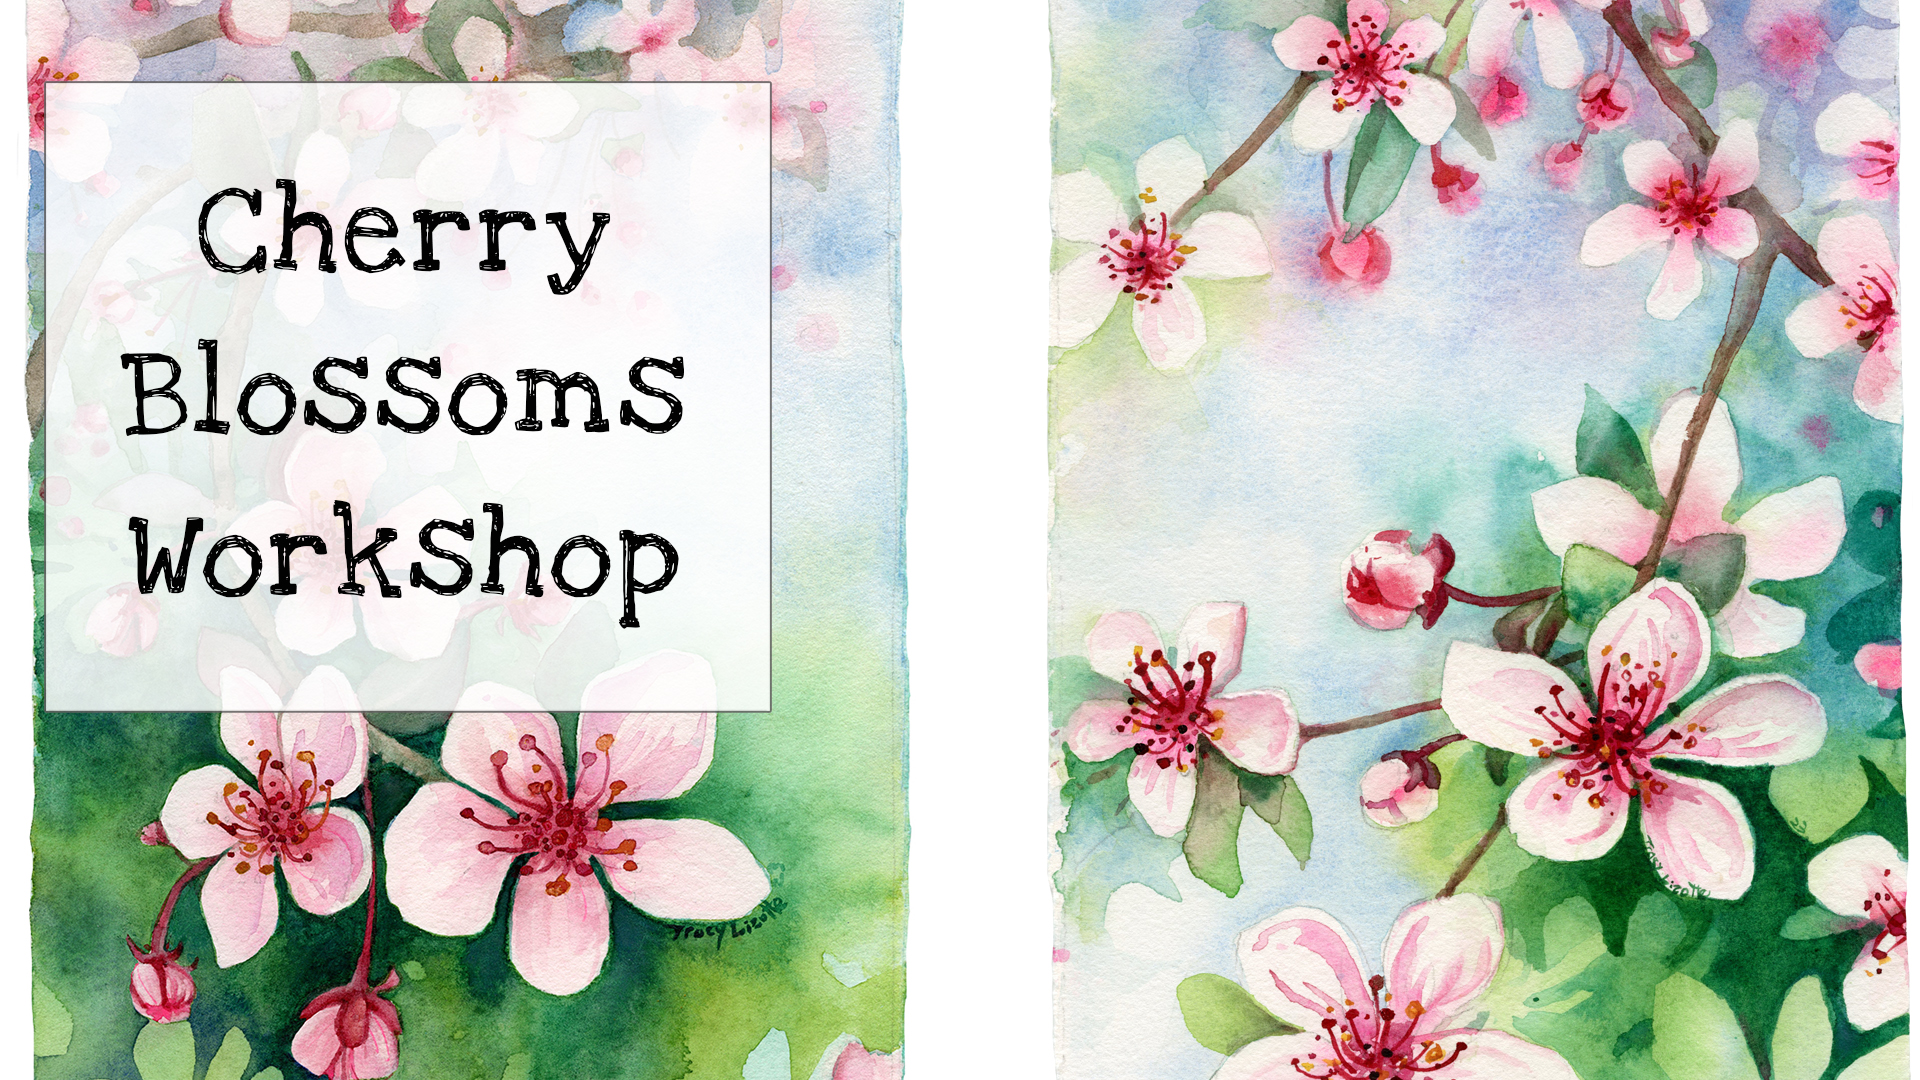 Learn to paint cherry blossoms with watercolors